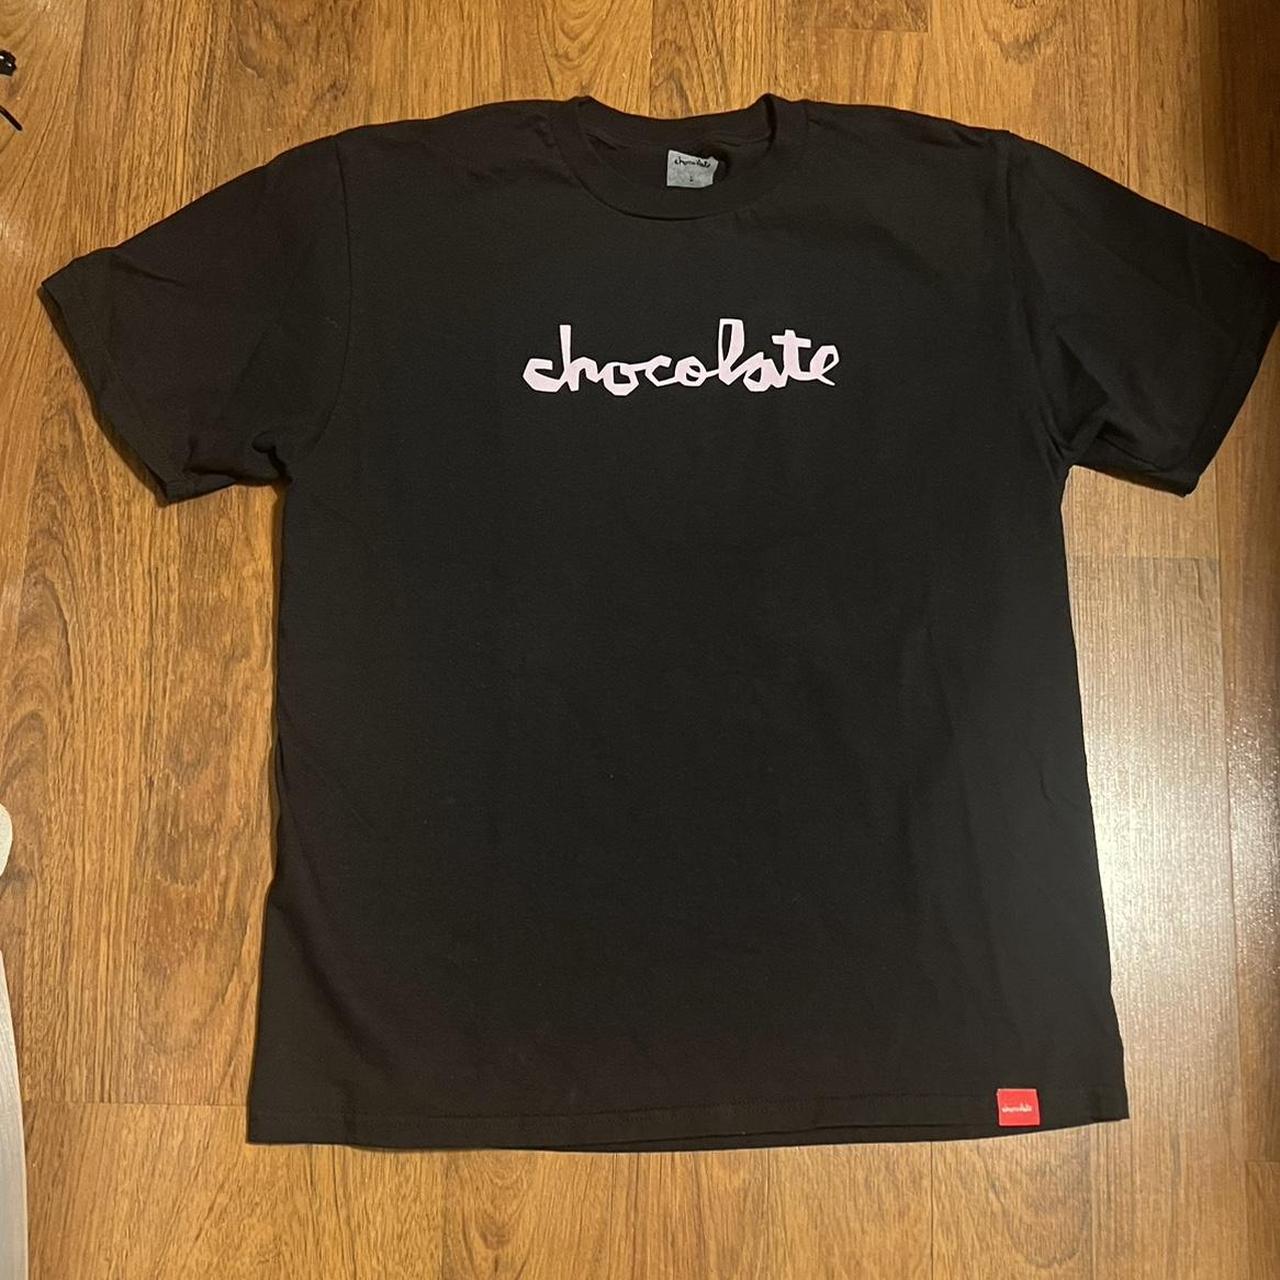 item listed by chris_steezy